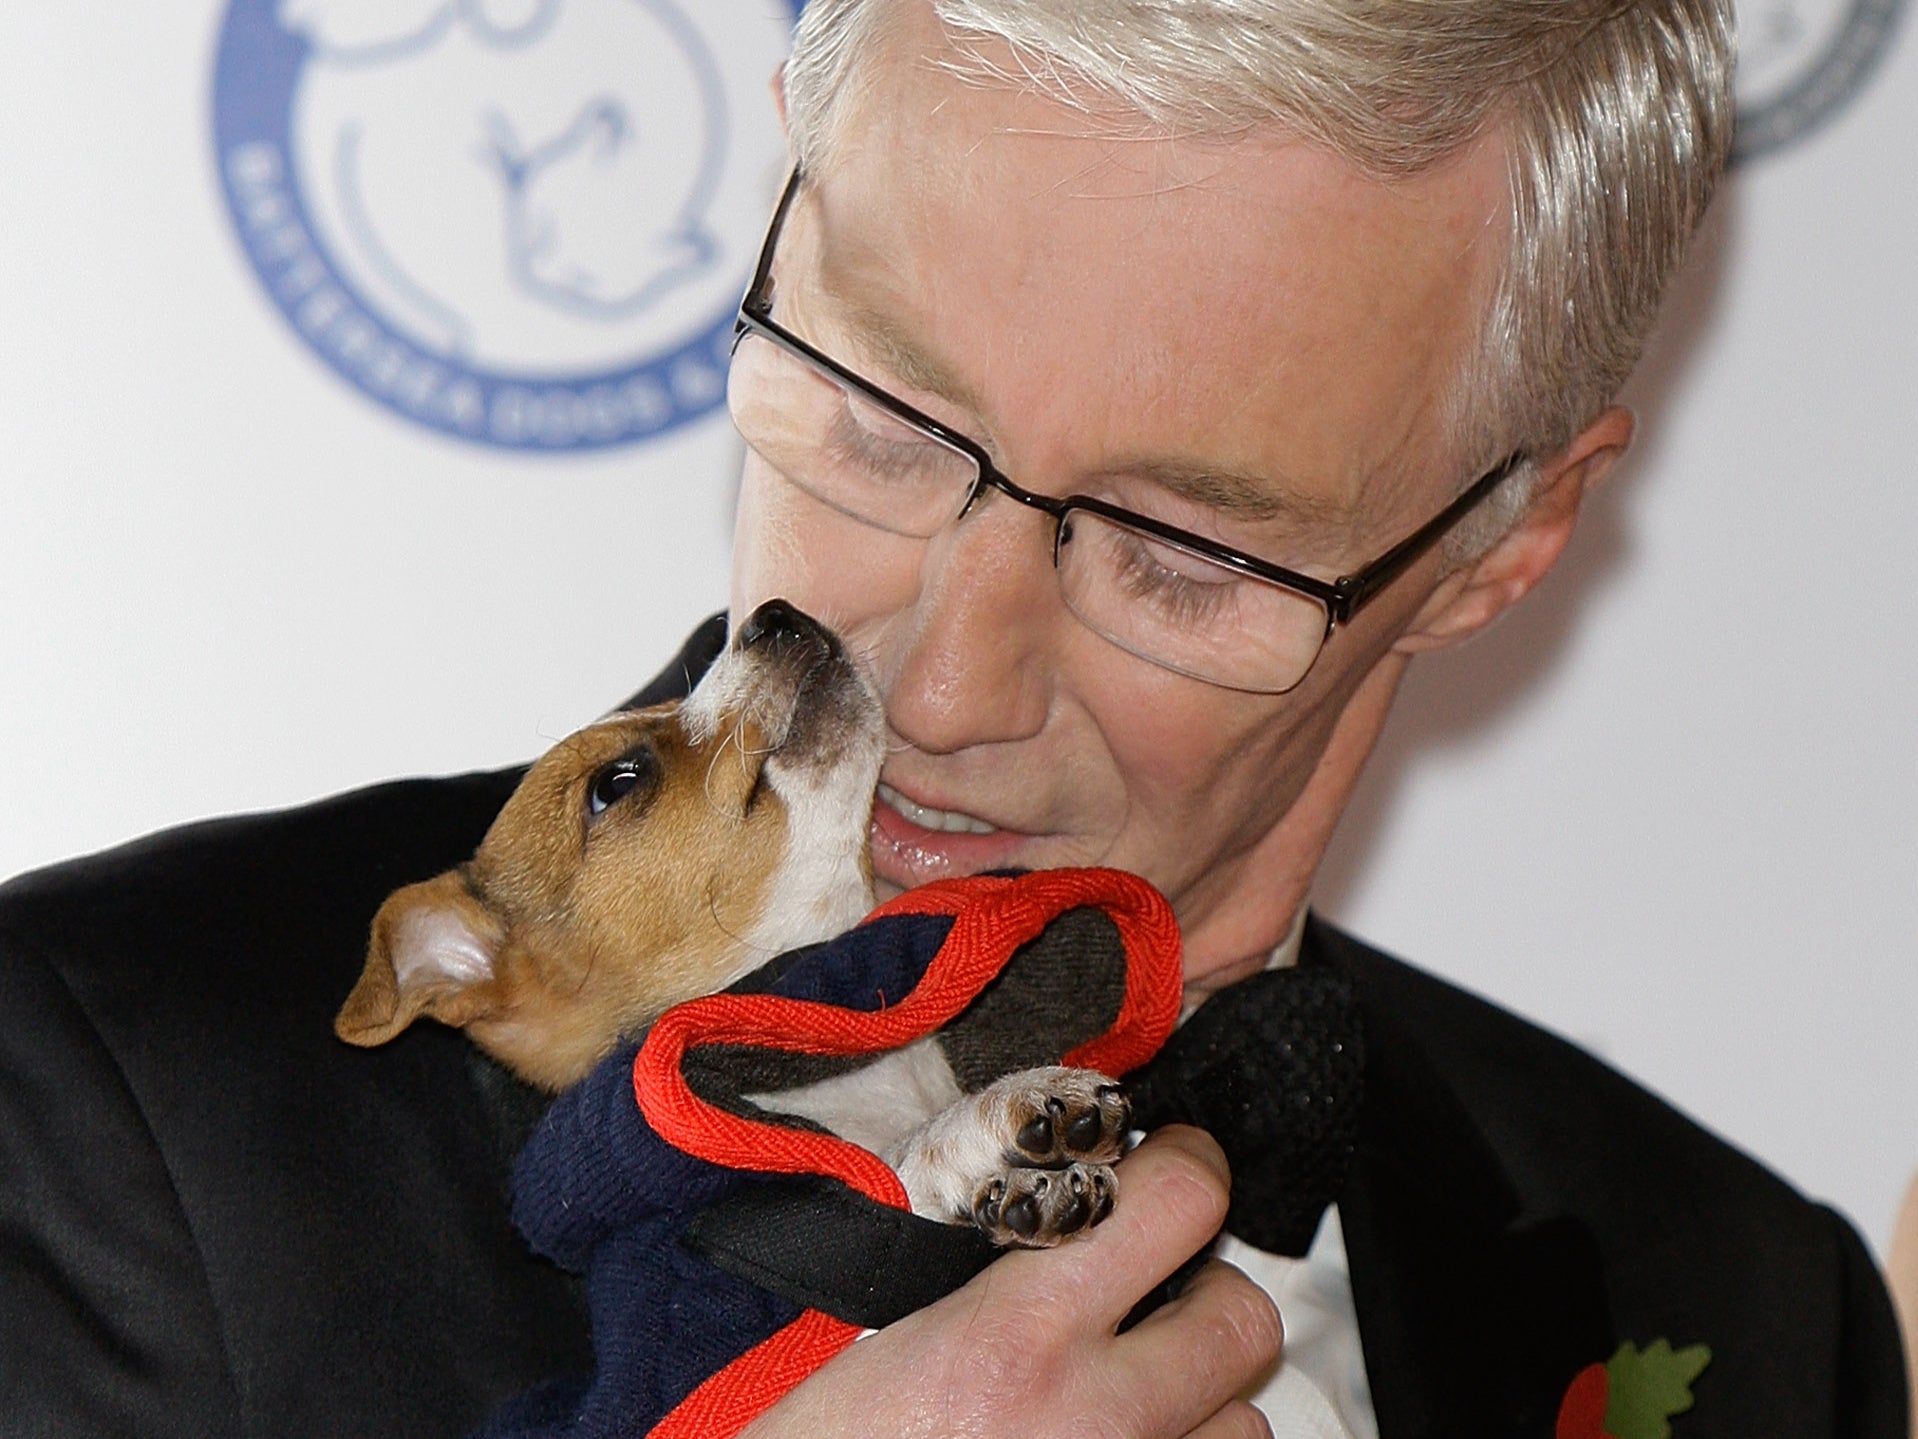 Paul O’Grady’s love of animals was well known